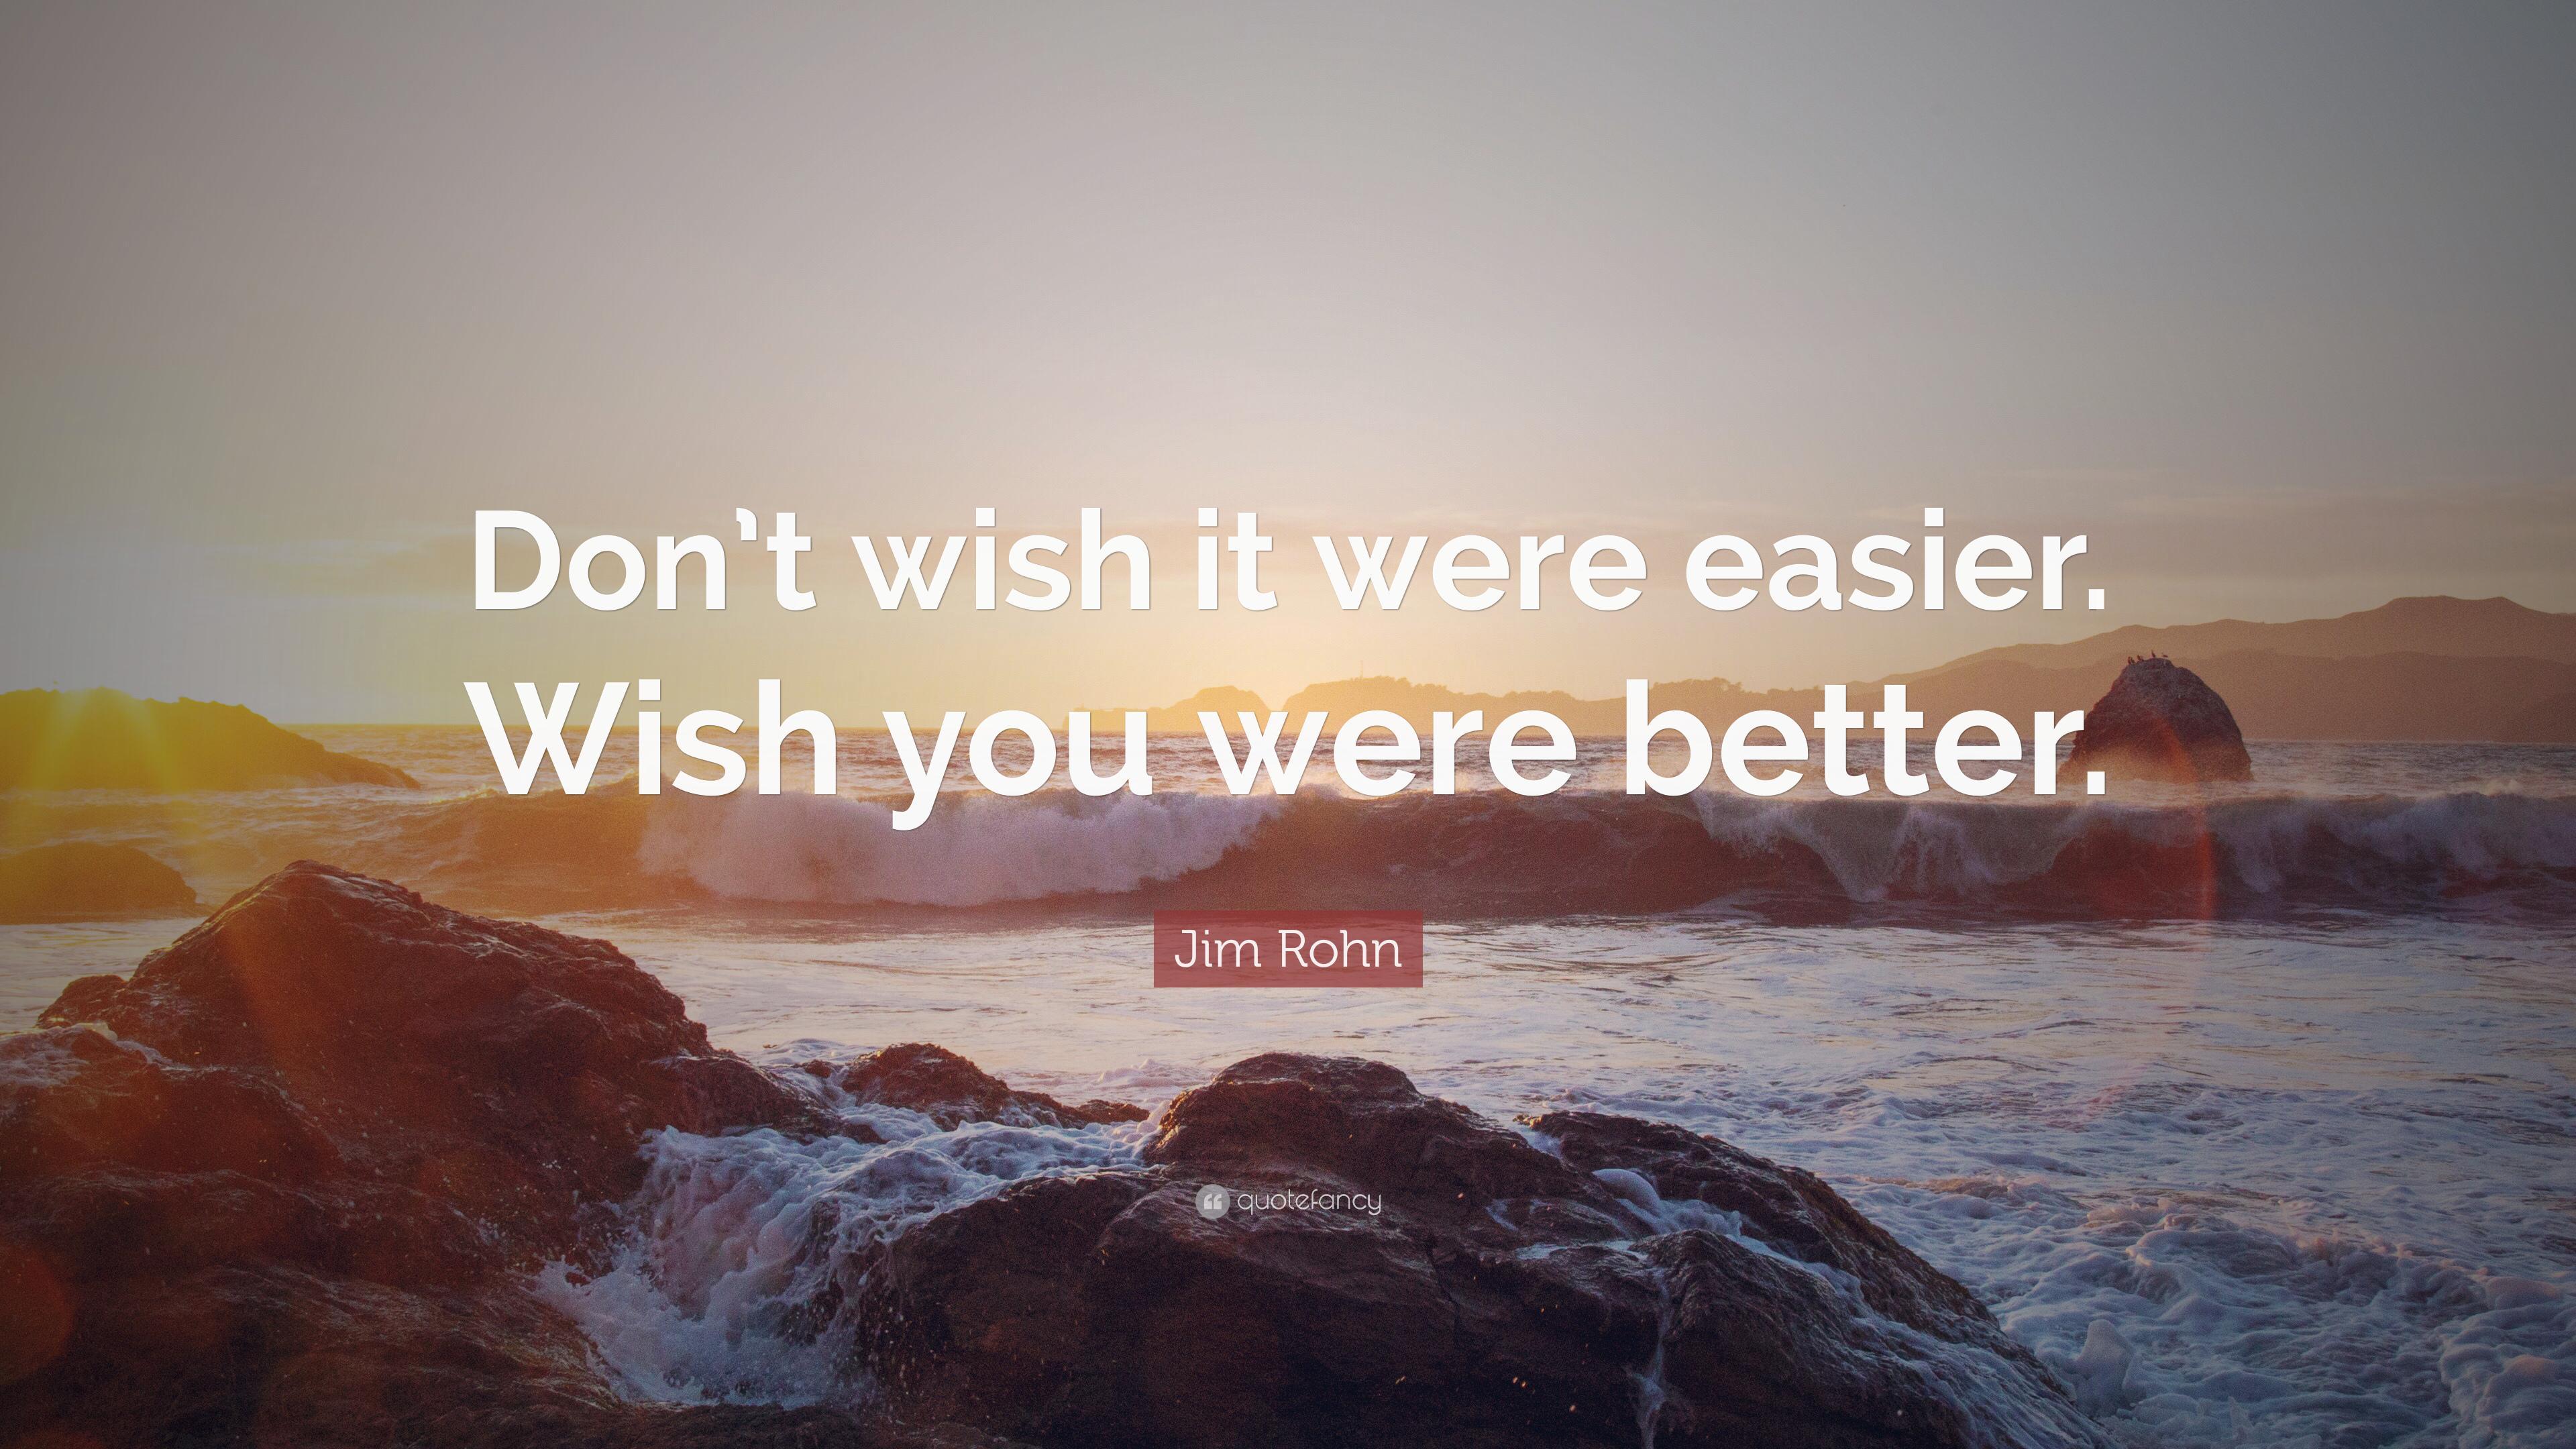 Jim Rohn Quote: "Don't wish it were easier. 